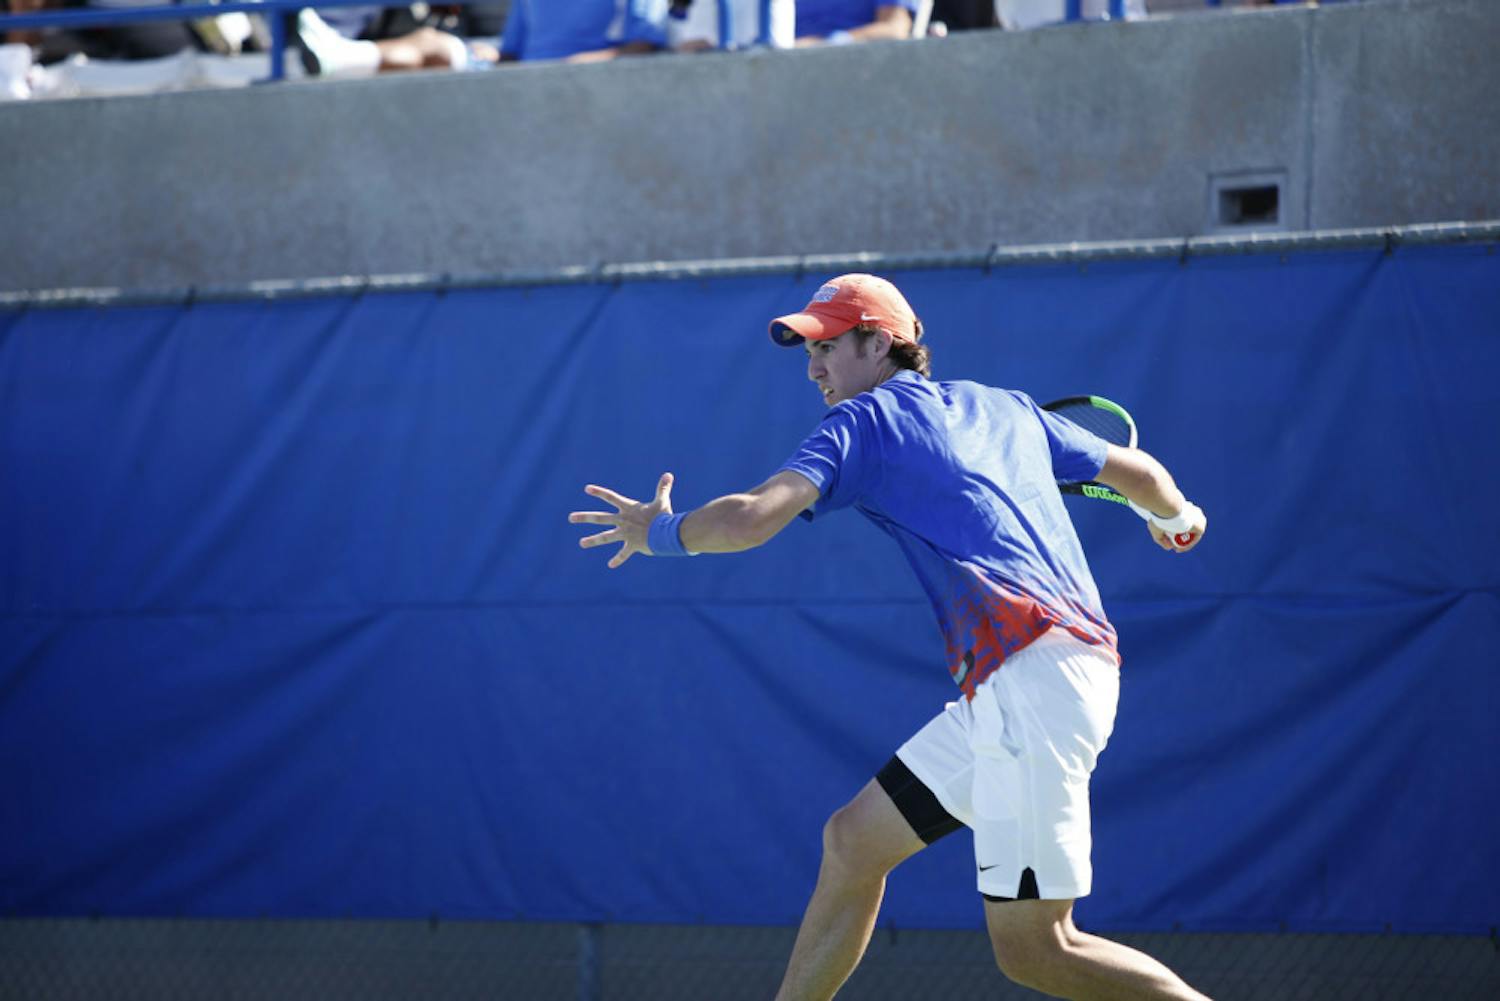 UF tennis player Alfredo Perez will start action on Friday in the Round of 16 at the National Fall Championships in California.